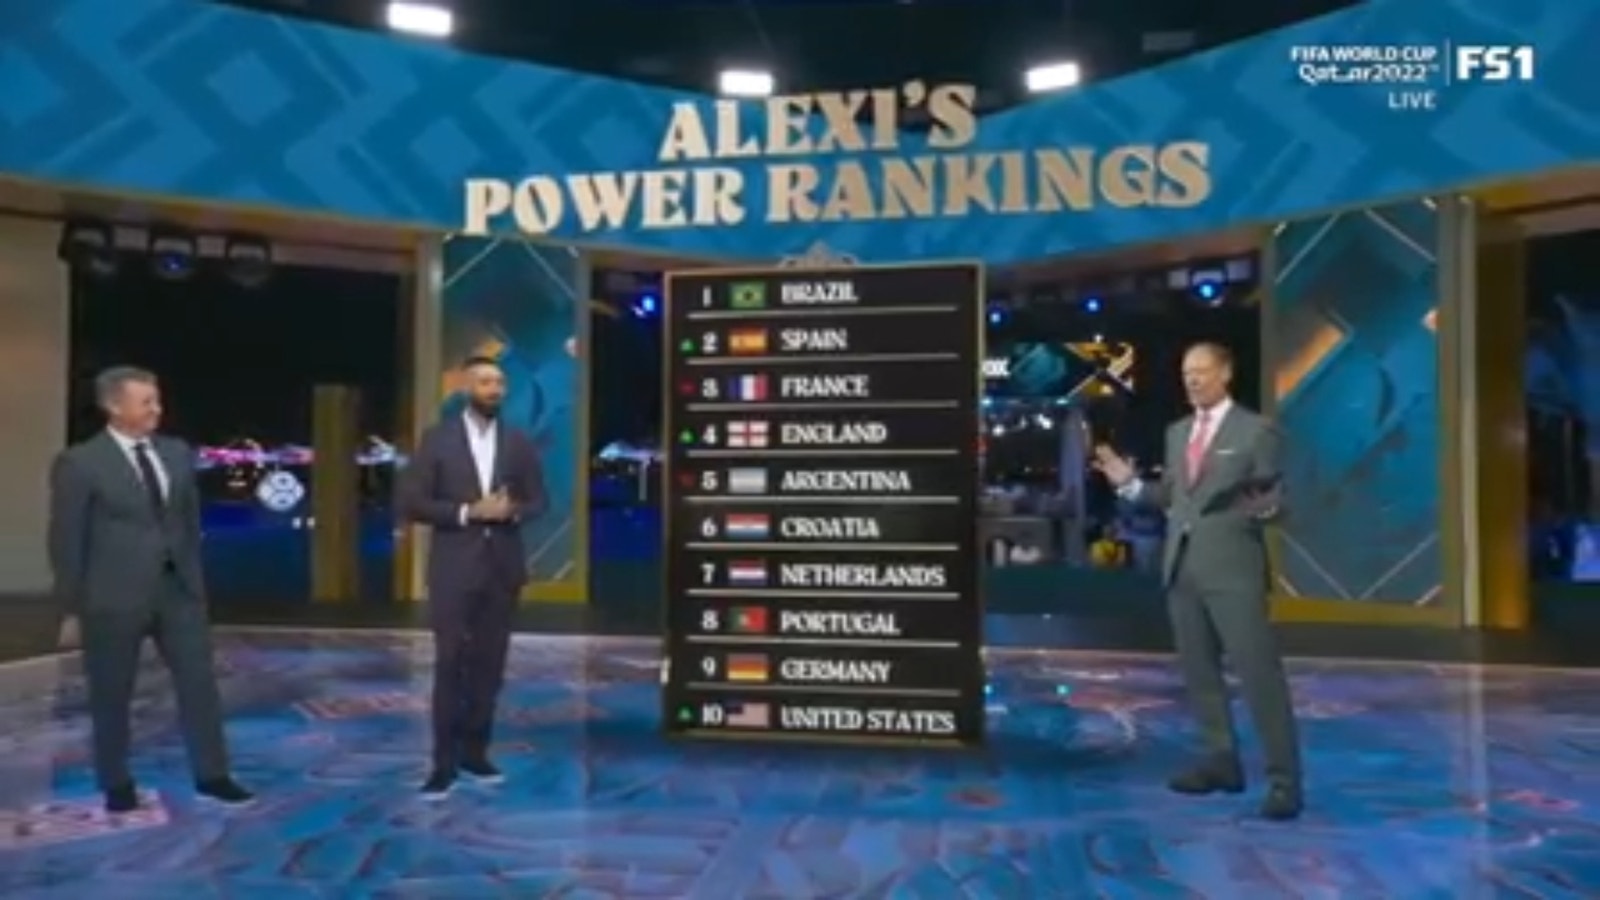 England, Spain and USMNT climb World Cup power rankings by Alexi Lalas